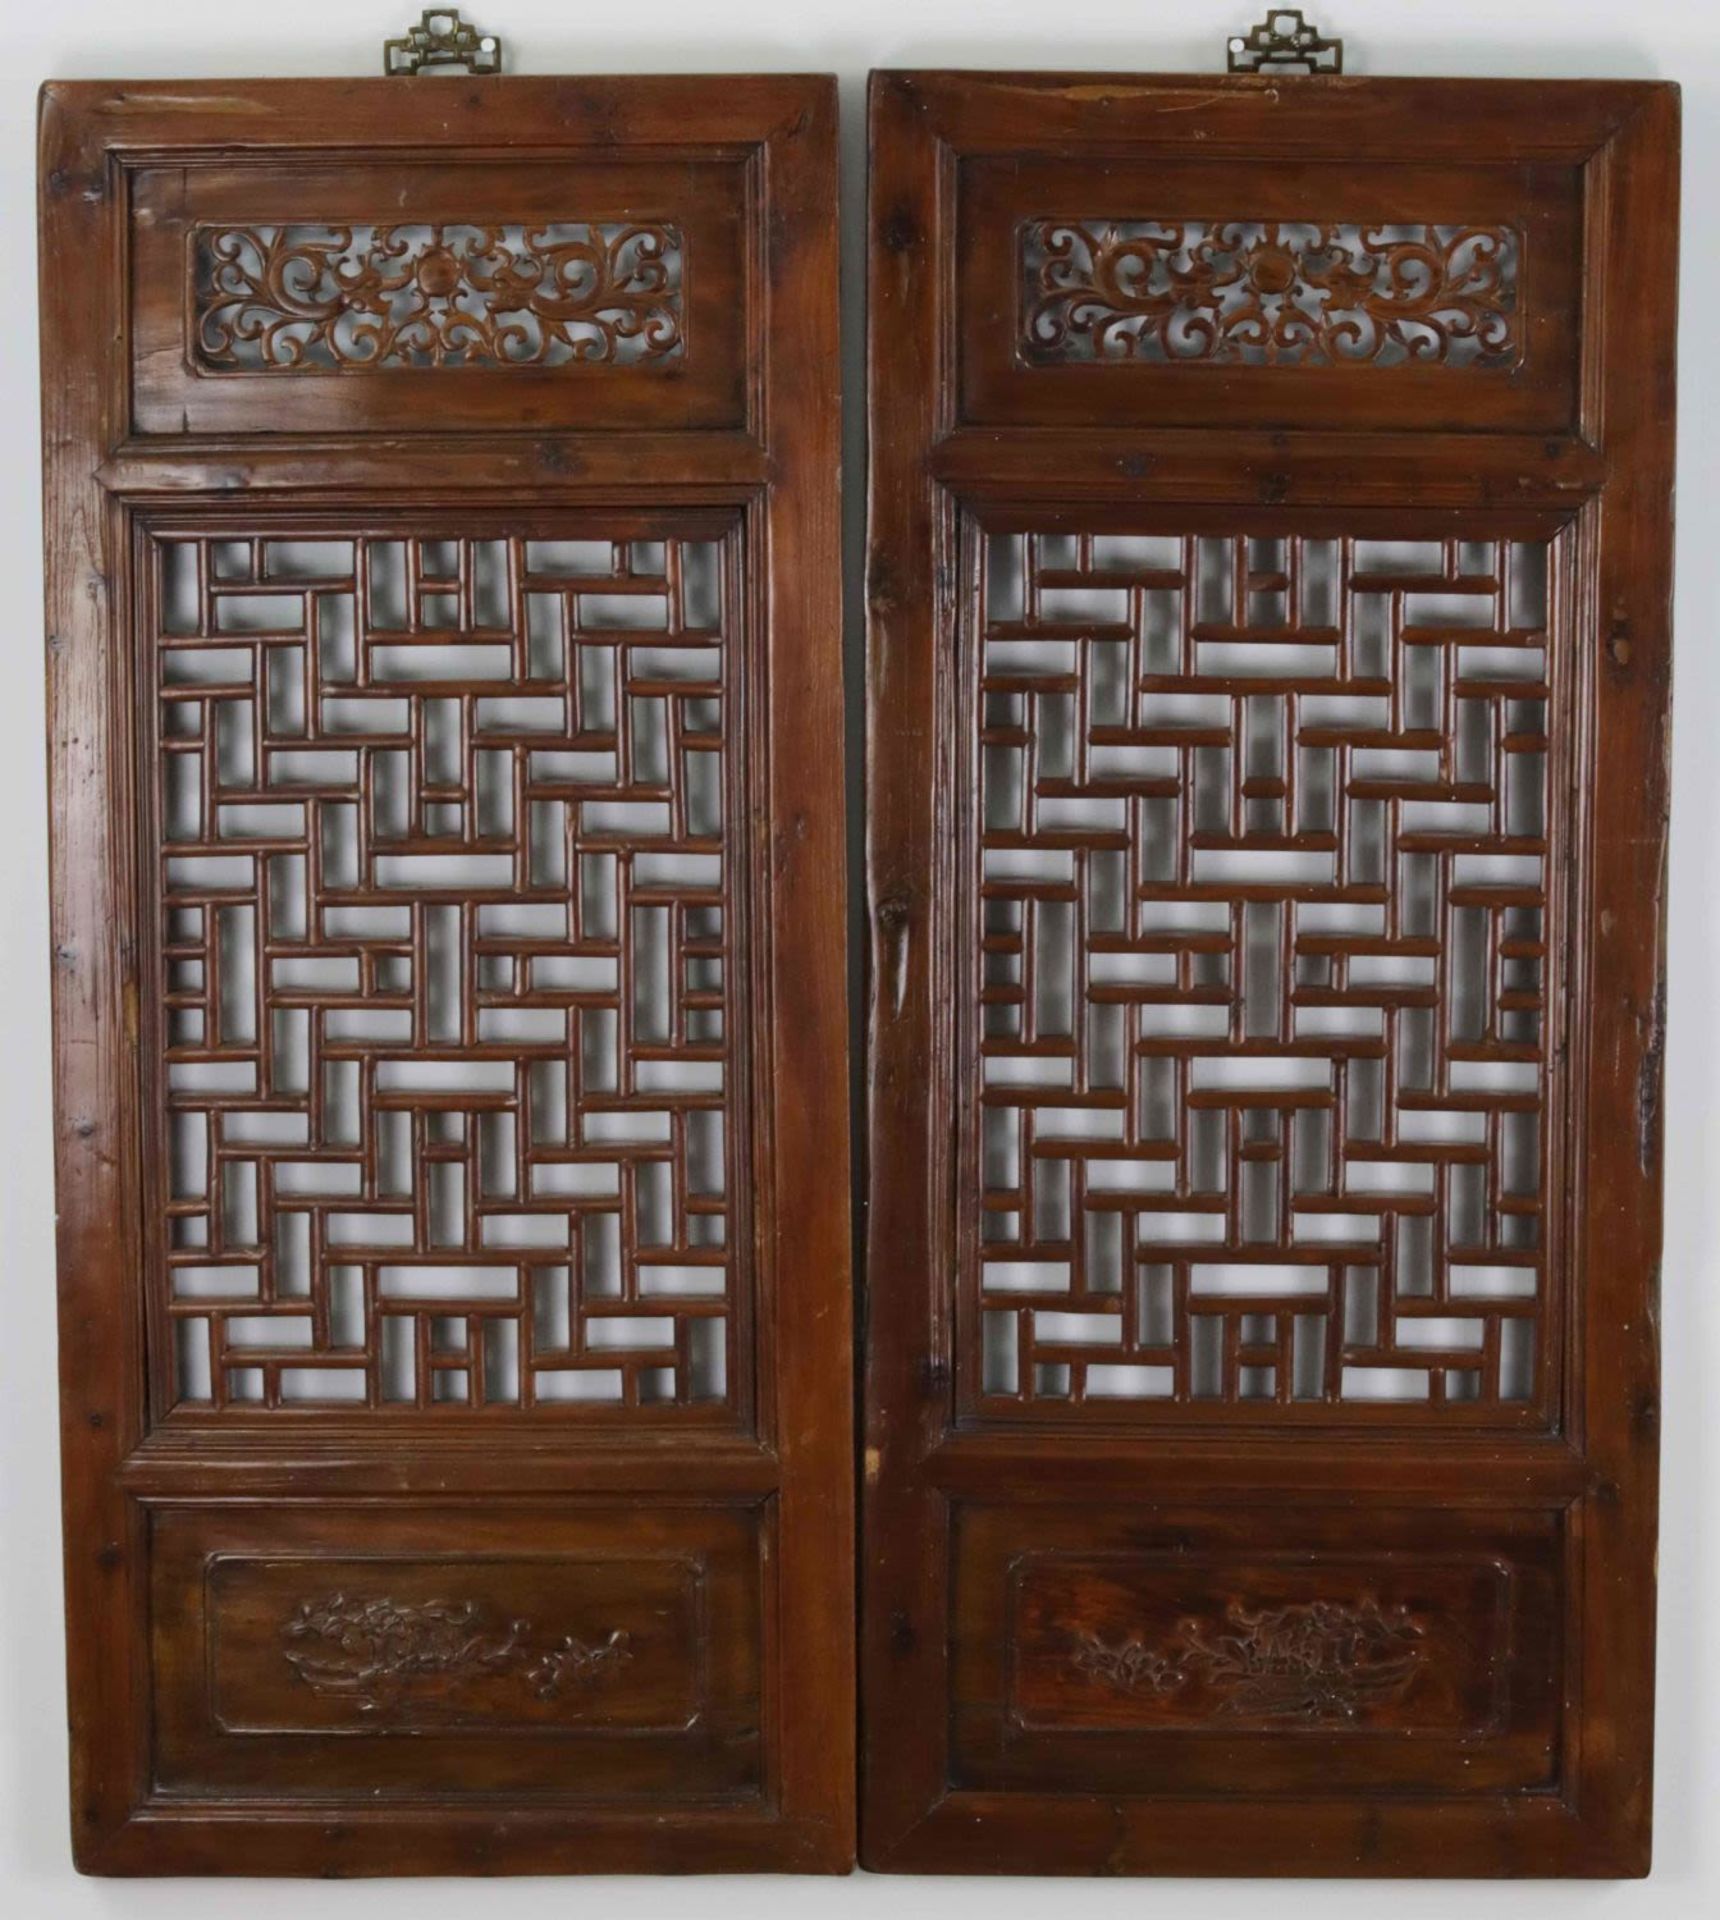 Set of two Chinese pine wood open fretwork panels, 20th Century